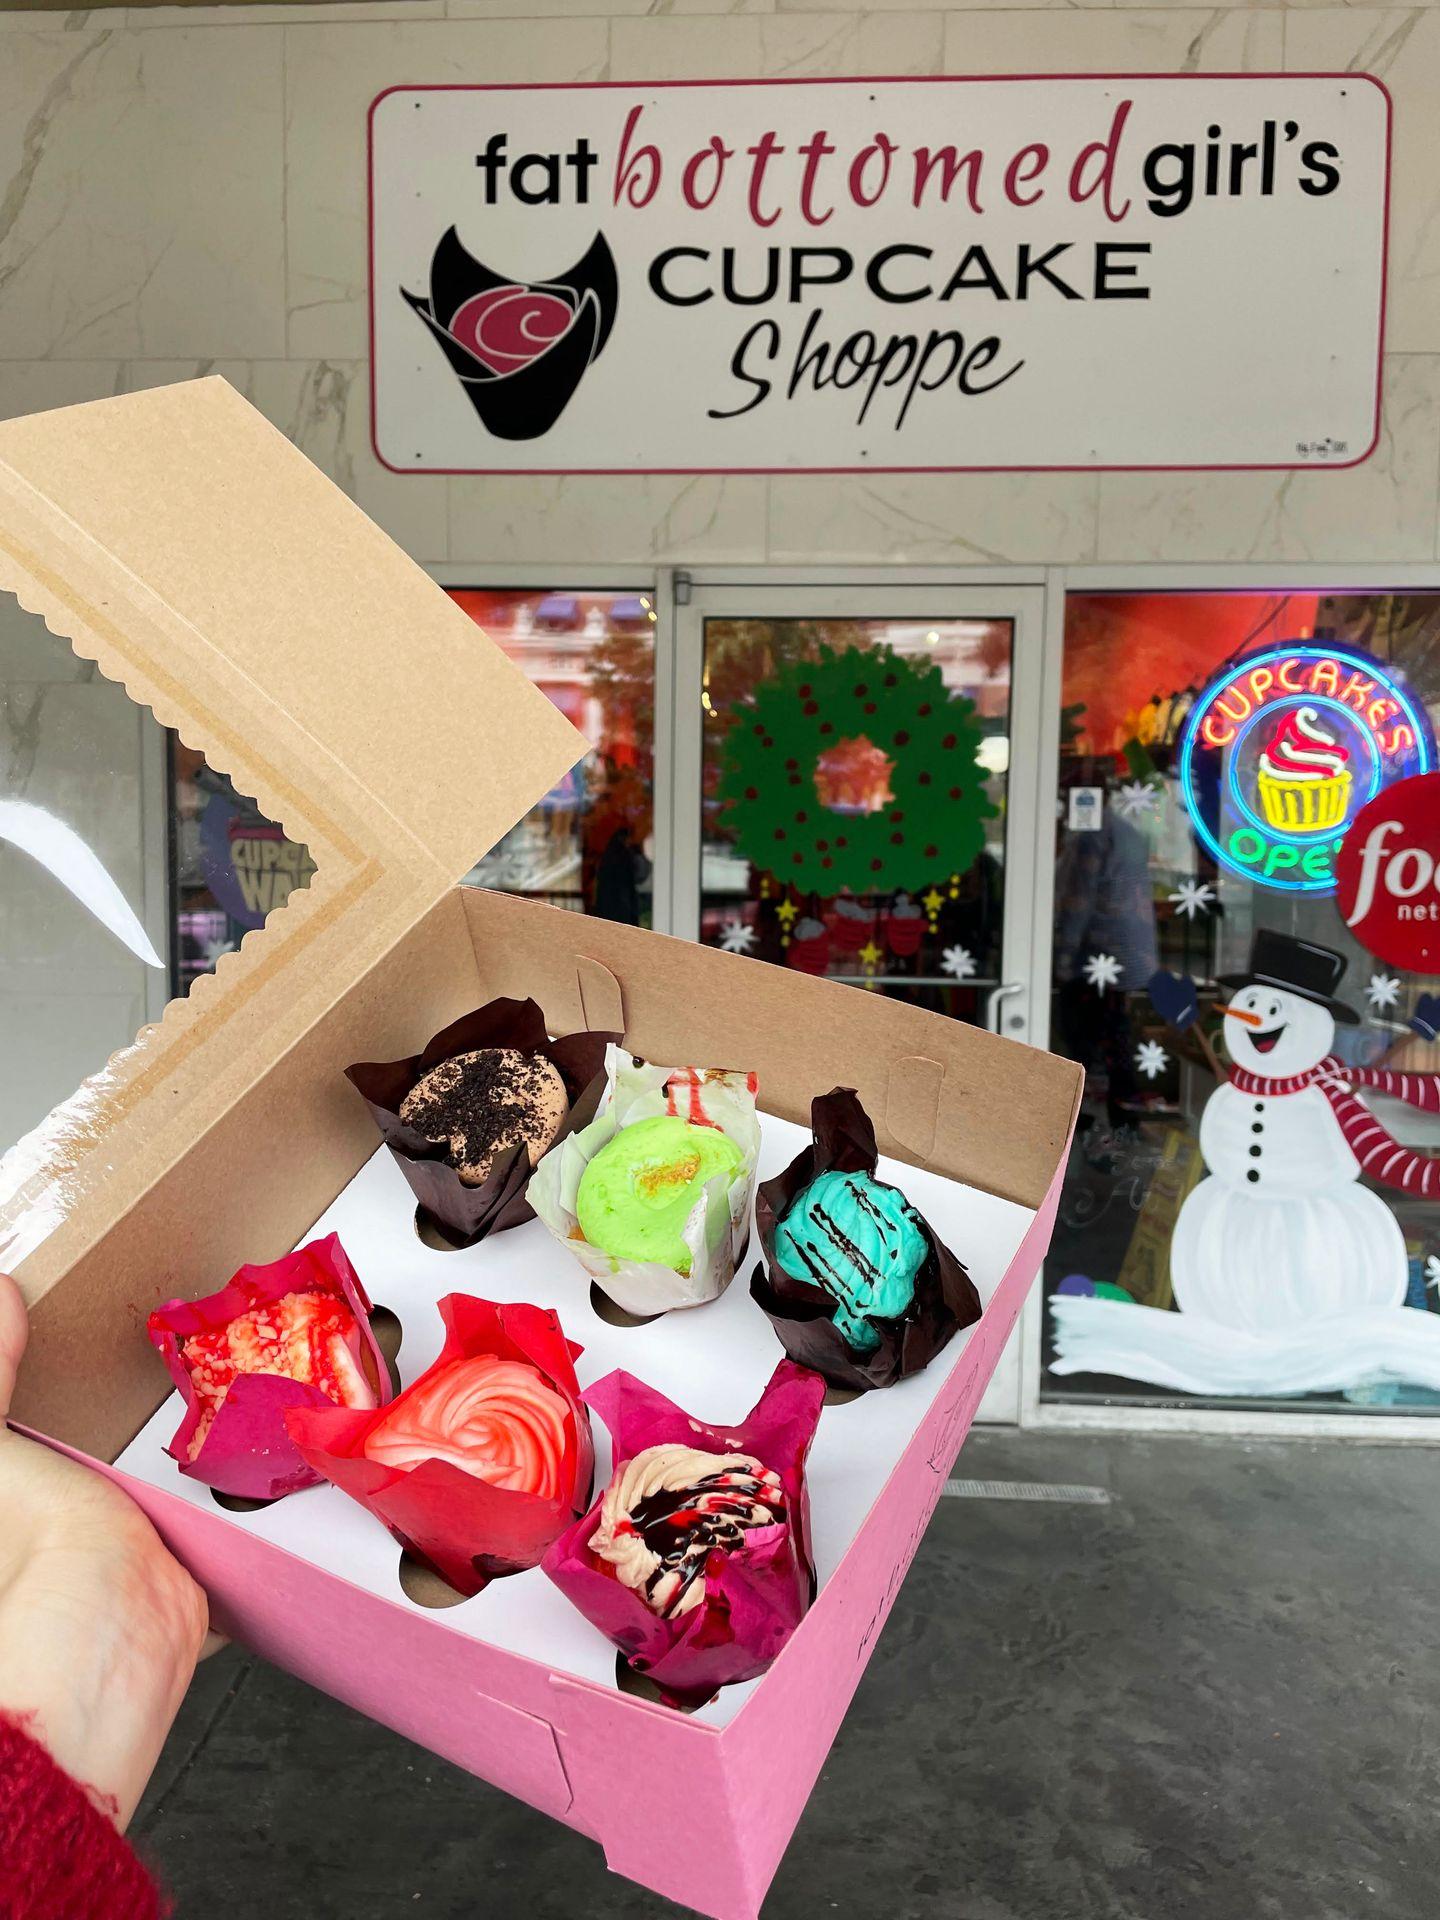 A box of six cupcakes being held up outside of Fat Bottomed Girls Cupcakes. The cupcakes have a mix of blue, green, brown, pink and red icing.